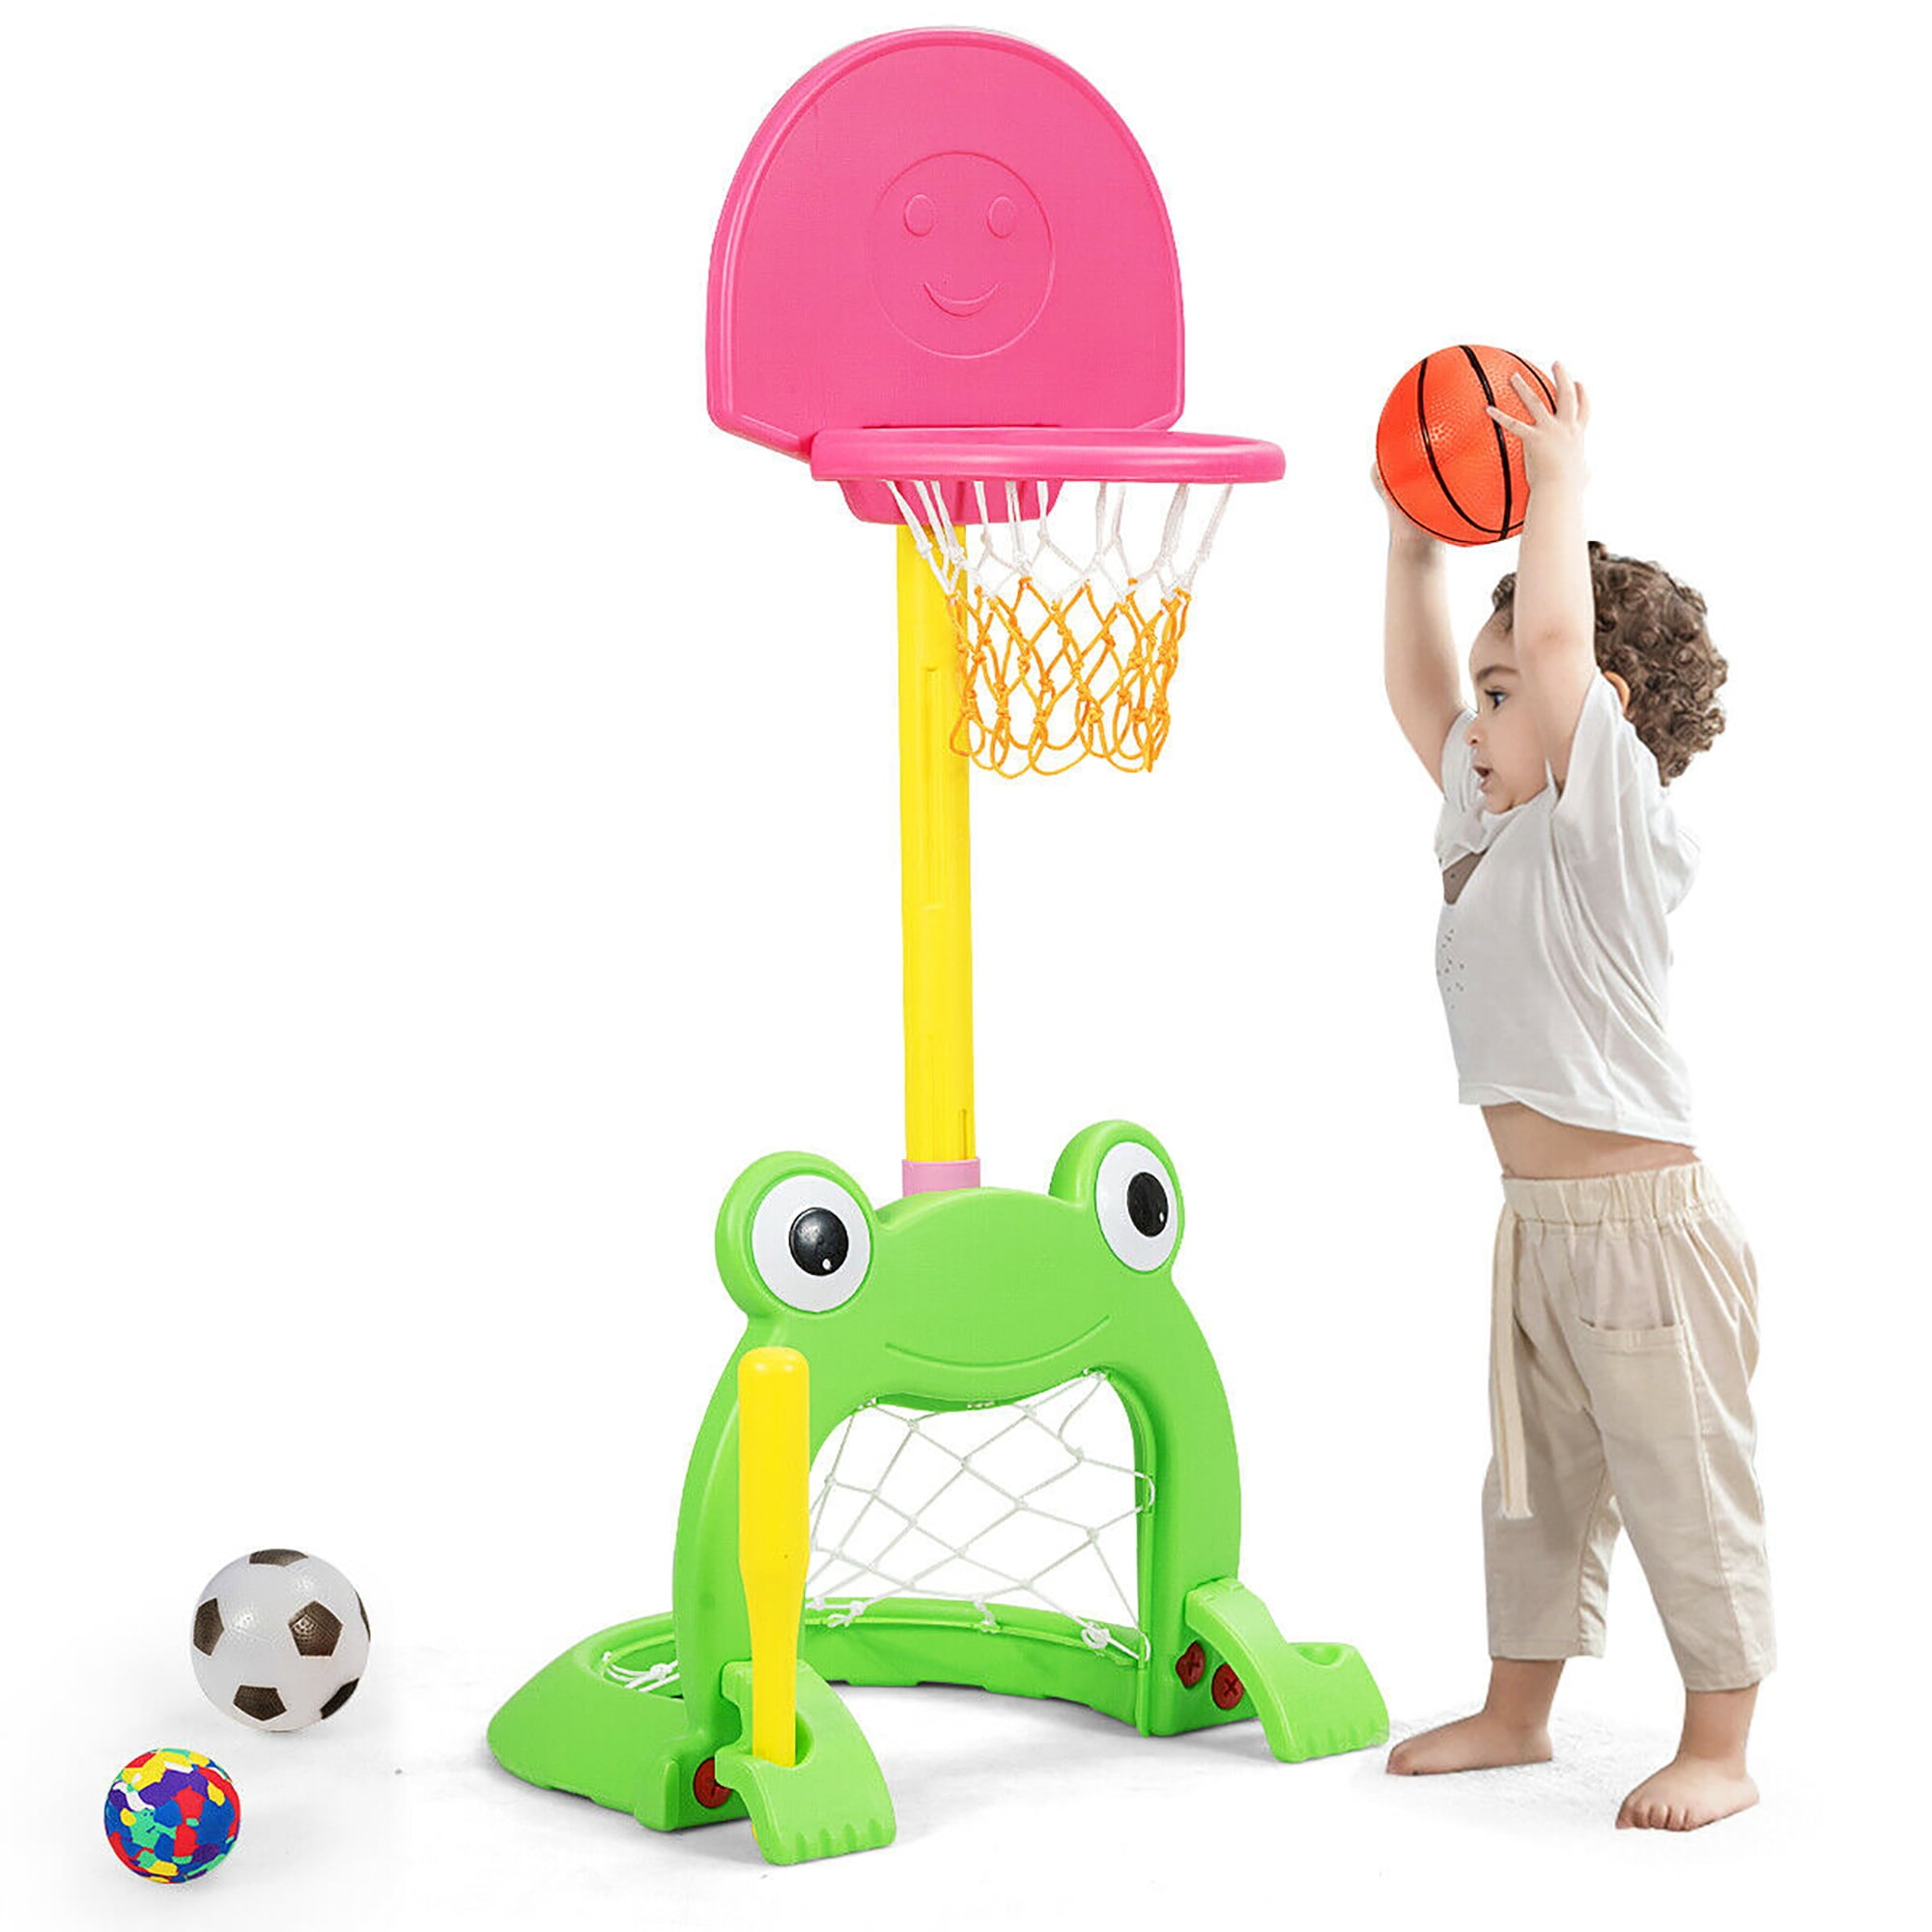 Adjustable Basketball Hoop Stand And Soccer Goal Kids Toy Set w/Ring Toss & Ball 